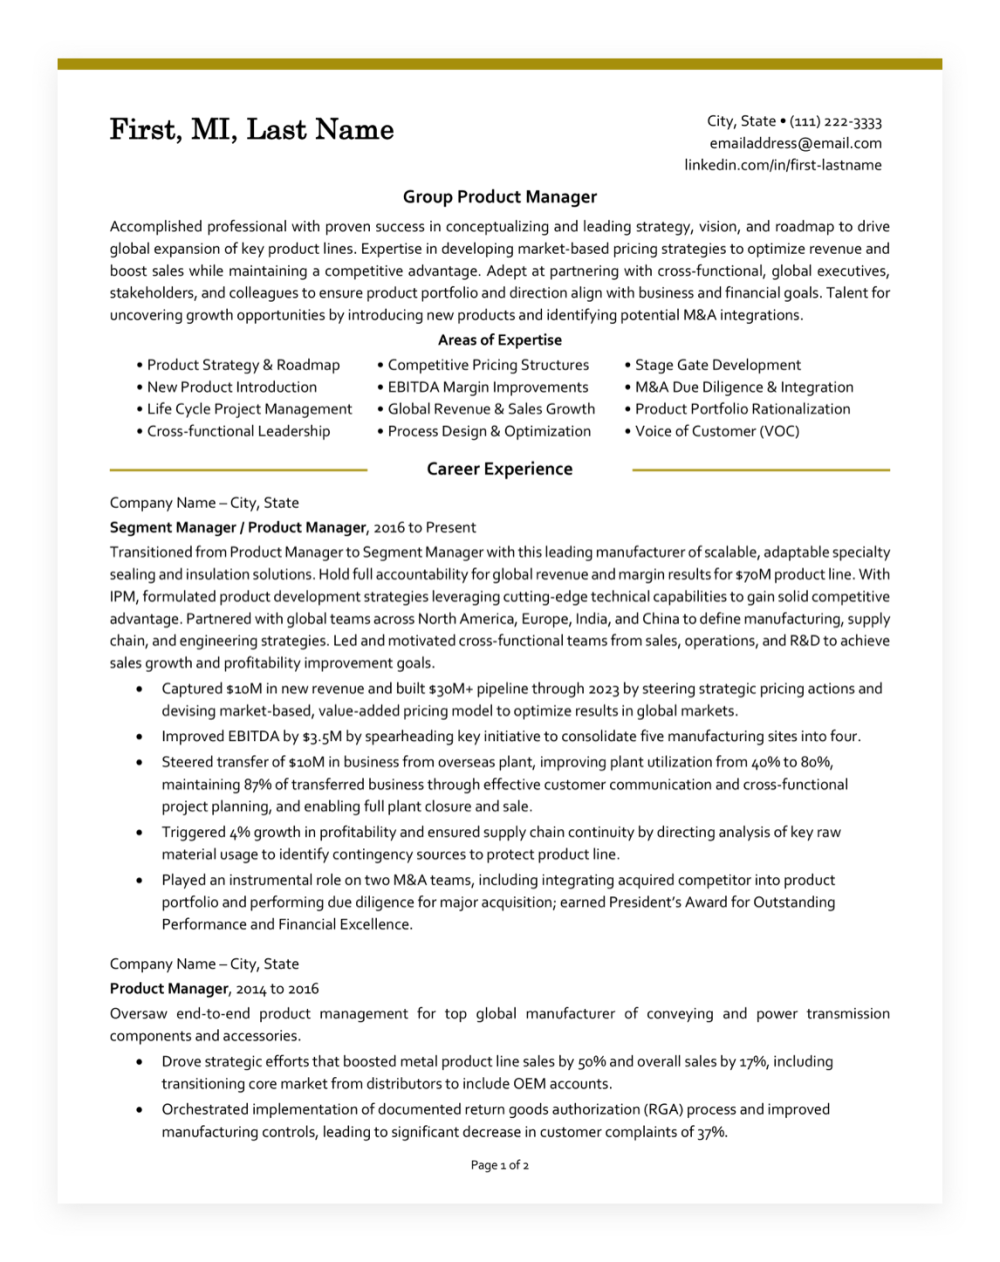 Example of a resume with an advanced template